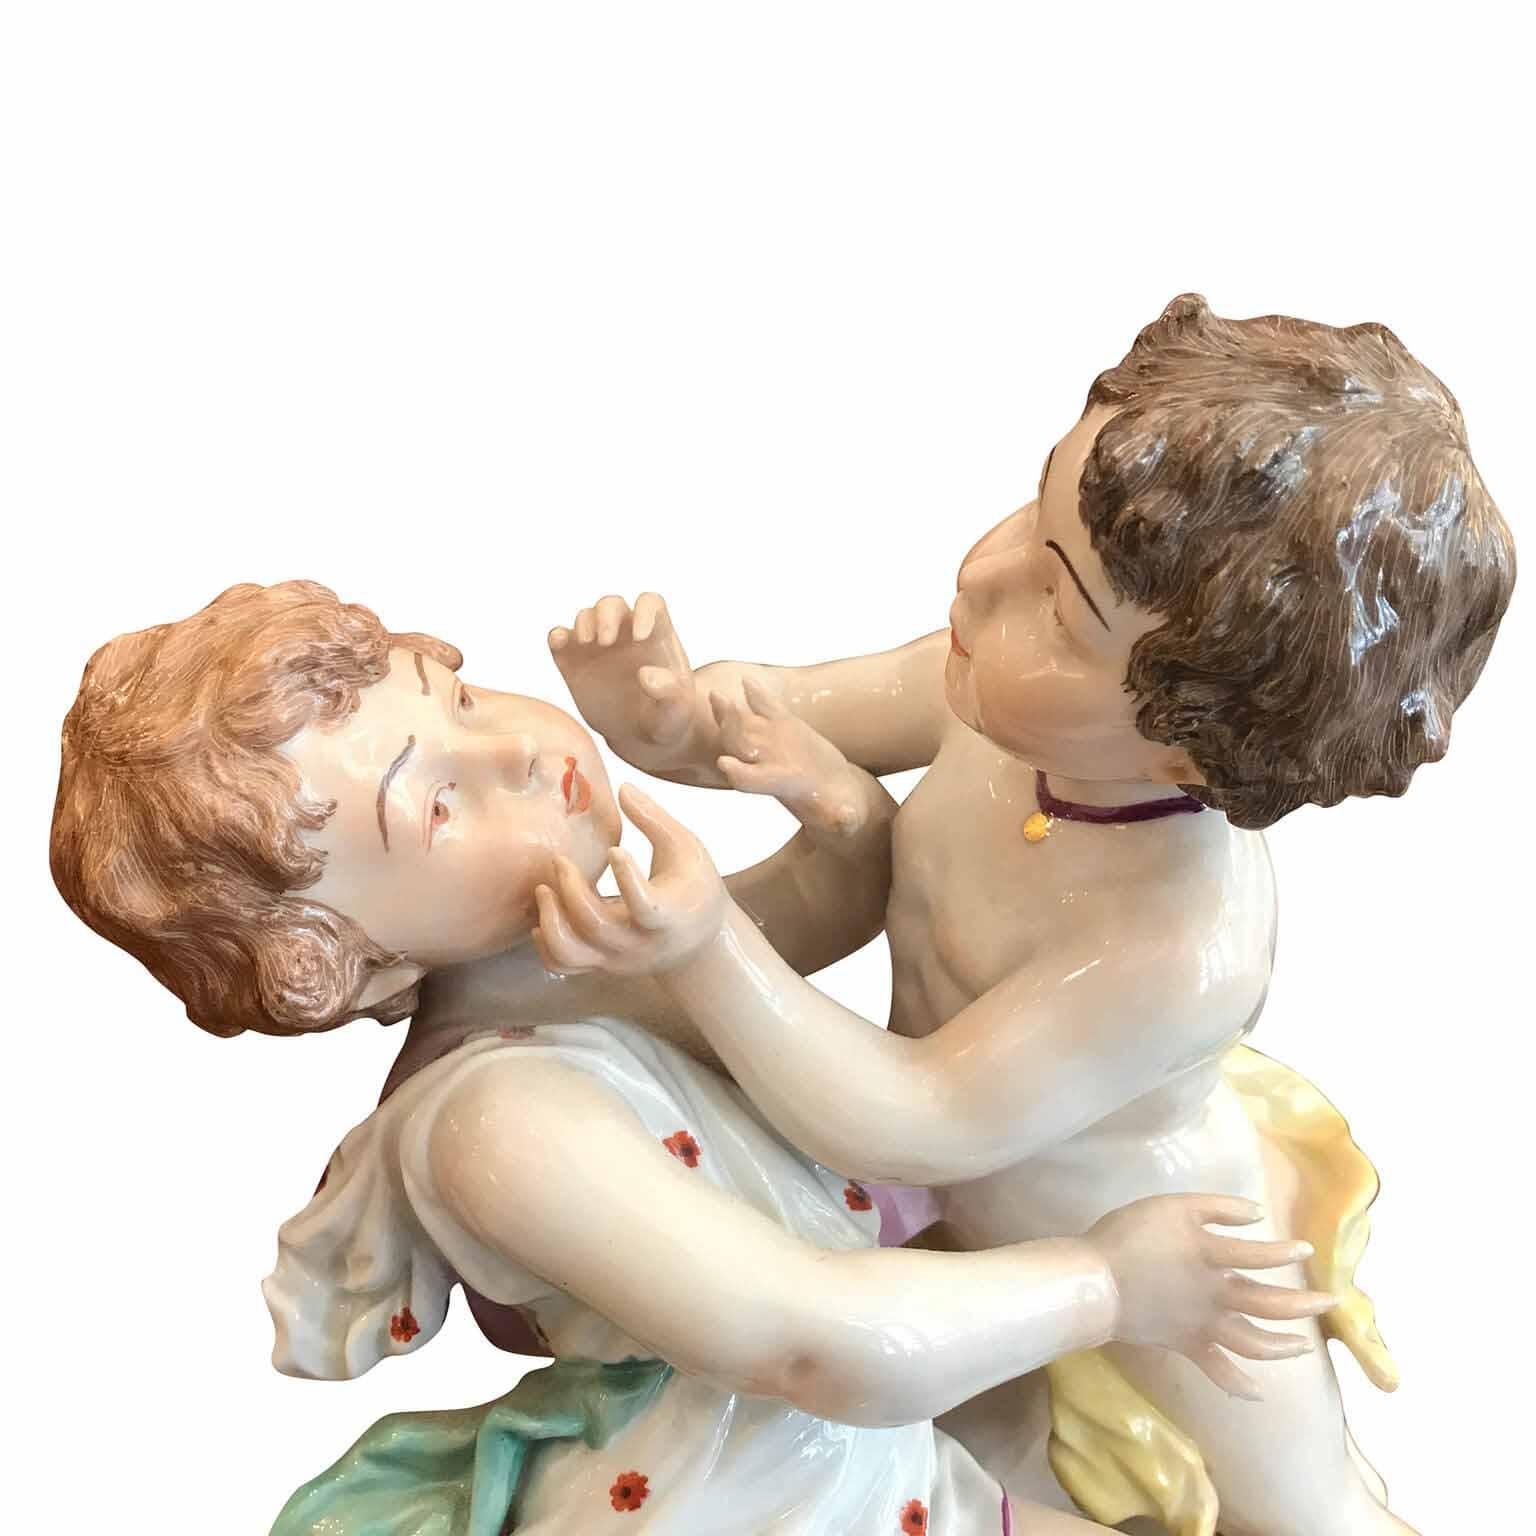 A 20th century bright and polychrome German Passau Porcelain centerpiece with Cherubs, a very decorative oval shaped porcelain sculpture featuring two playing putti figures, seated on a stone.
Good conditions, marked on the bottom by the German